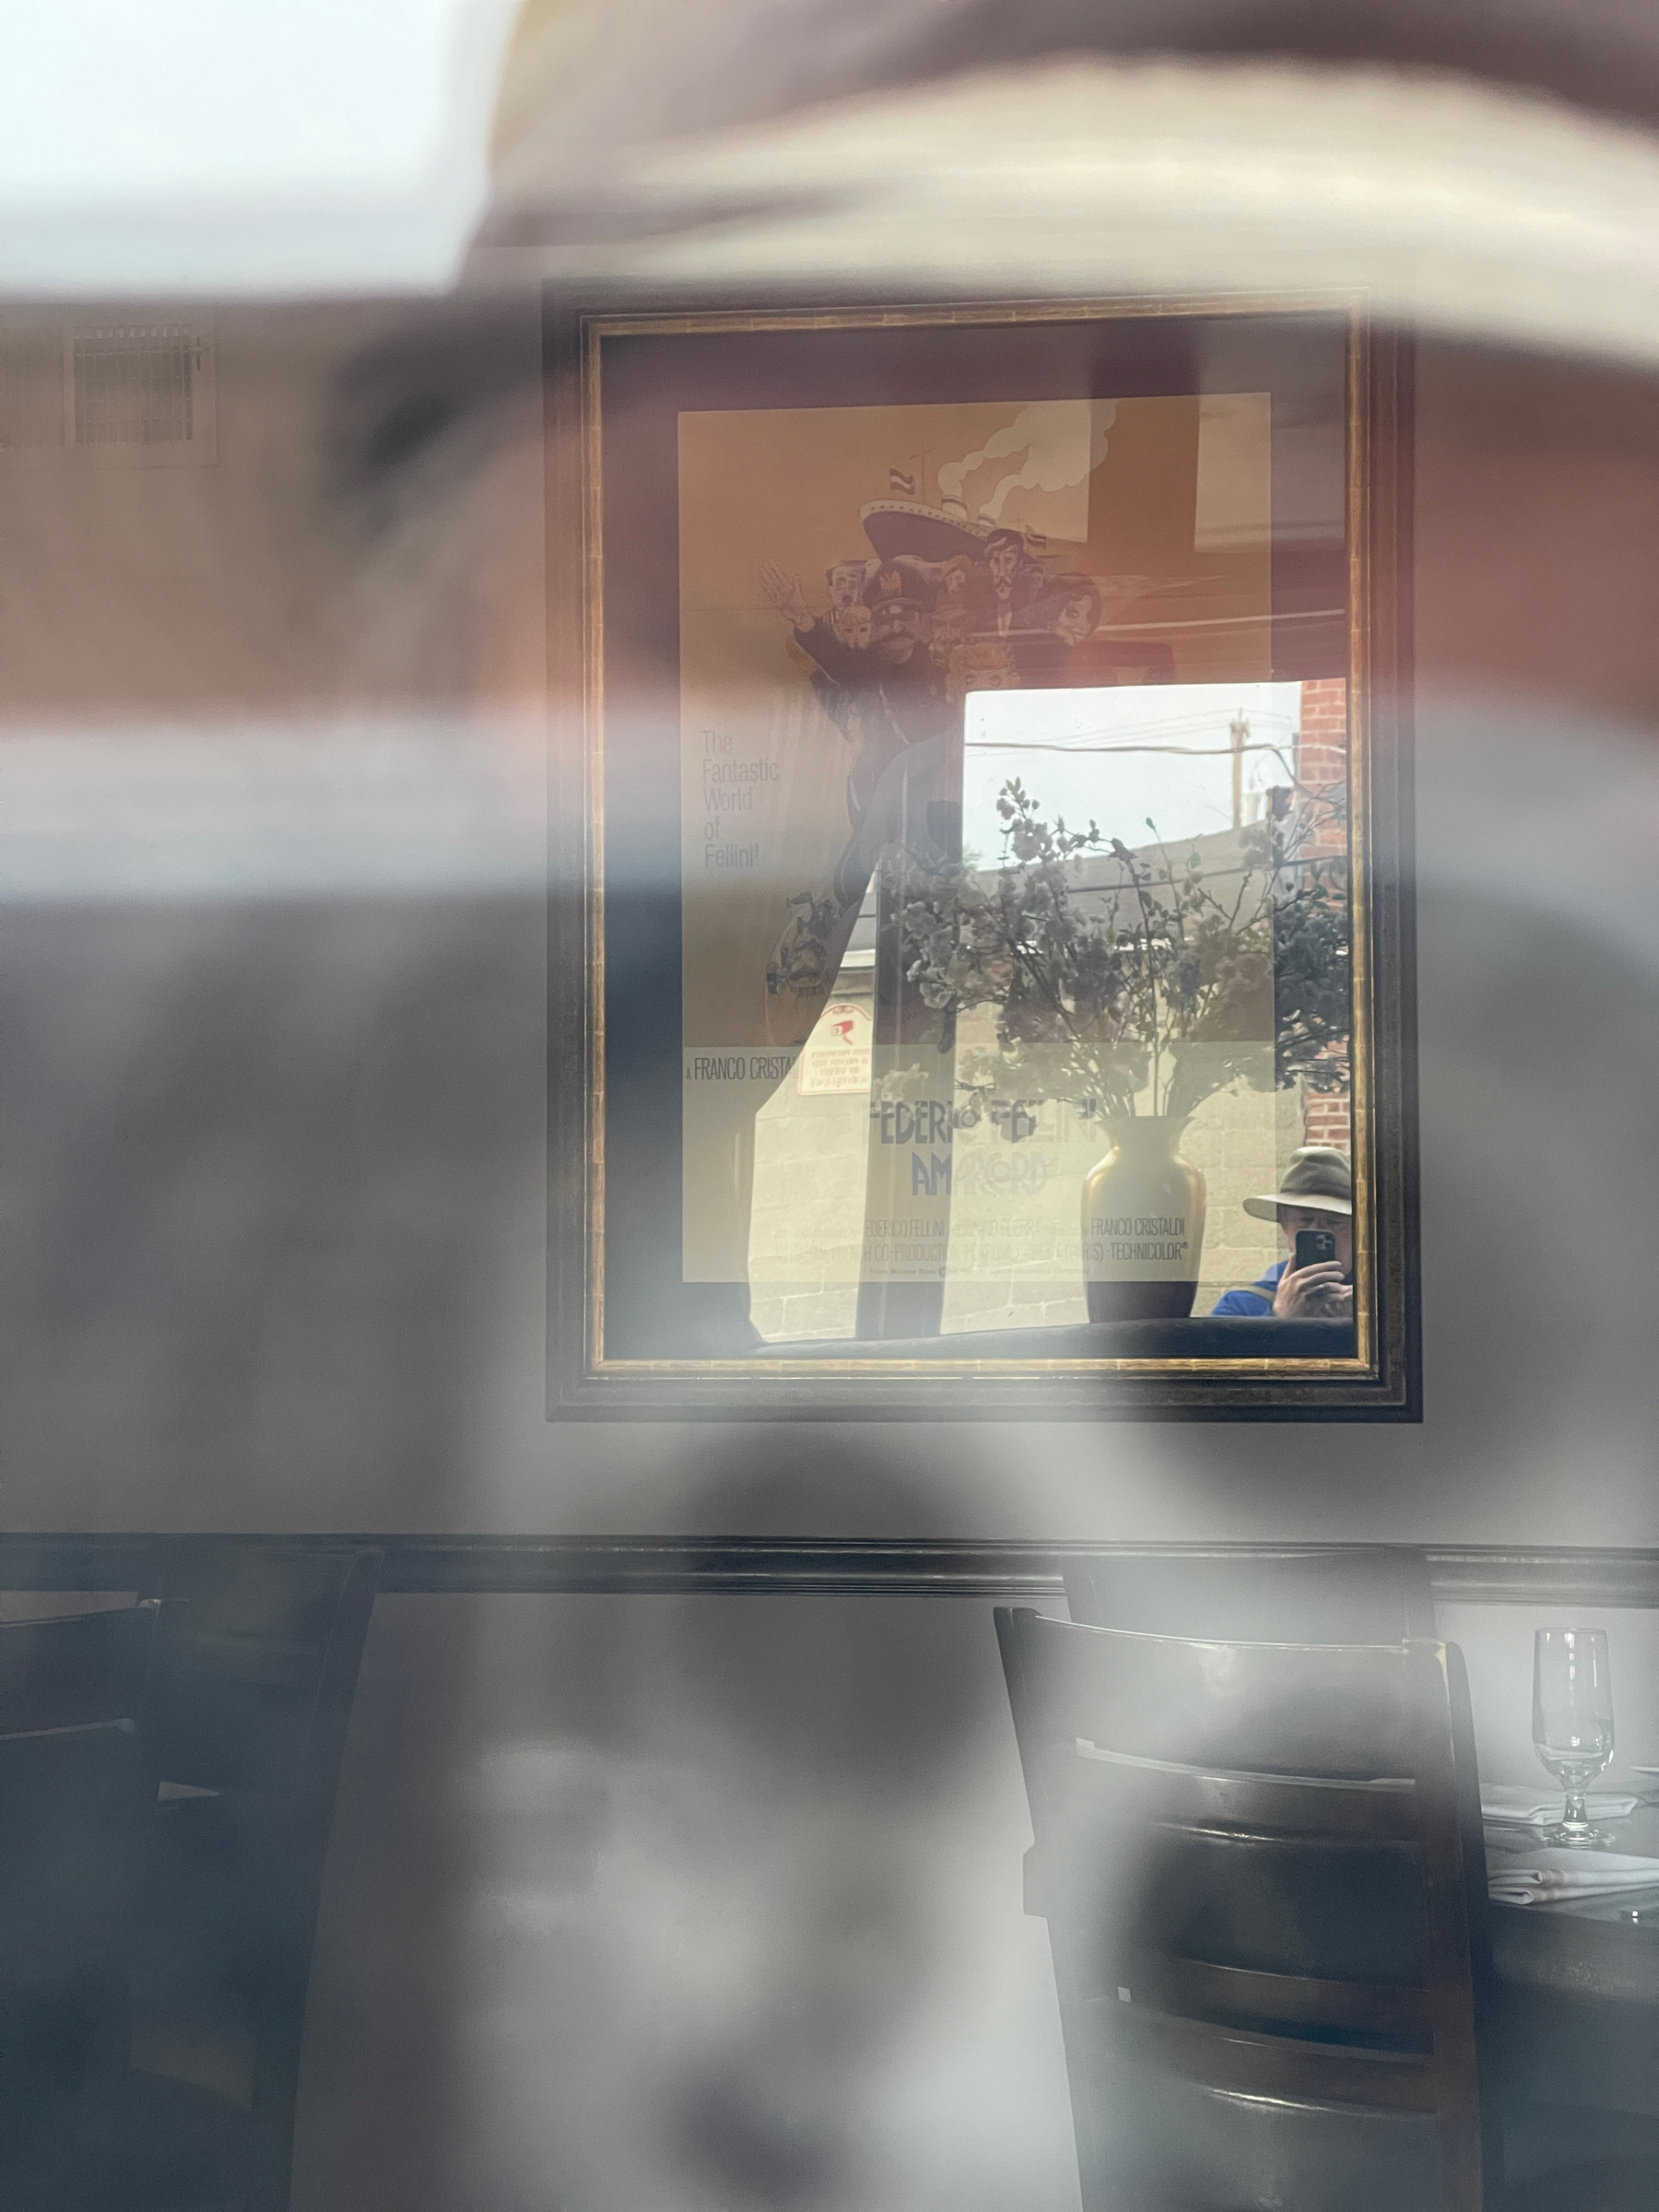 Self reflected in a window and mirror across the room of a restaurant.